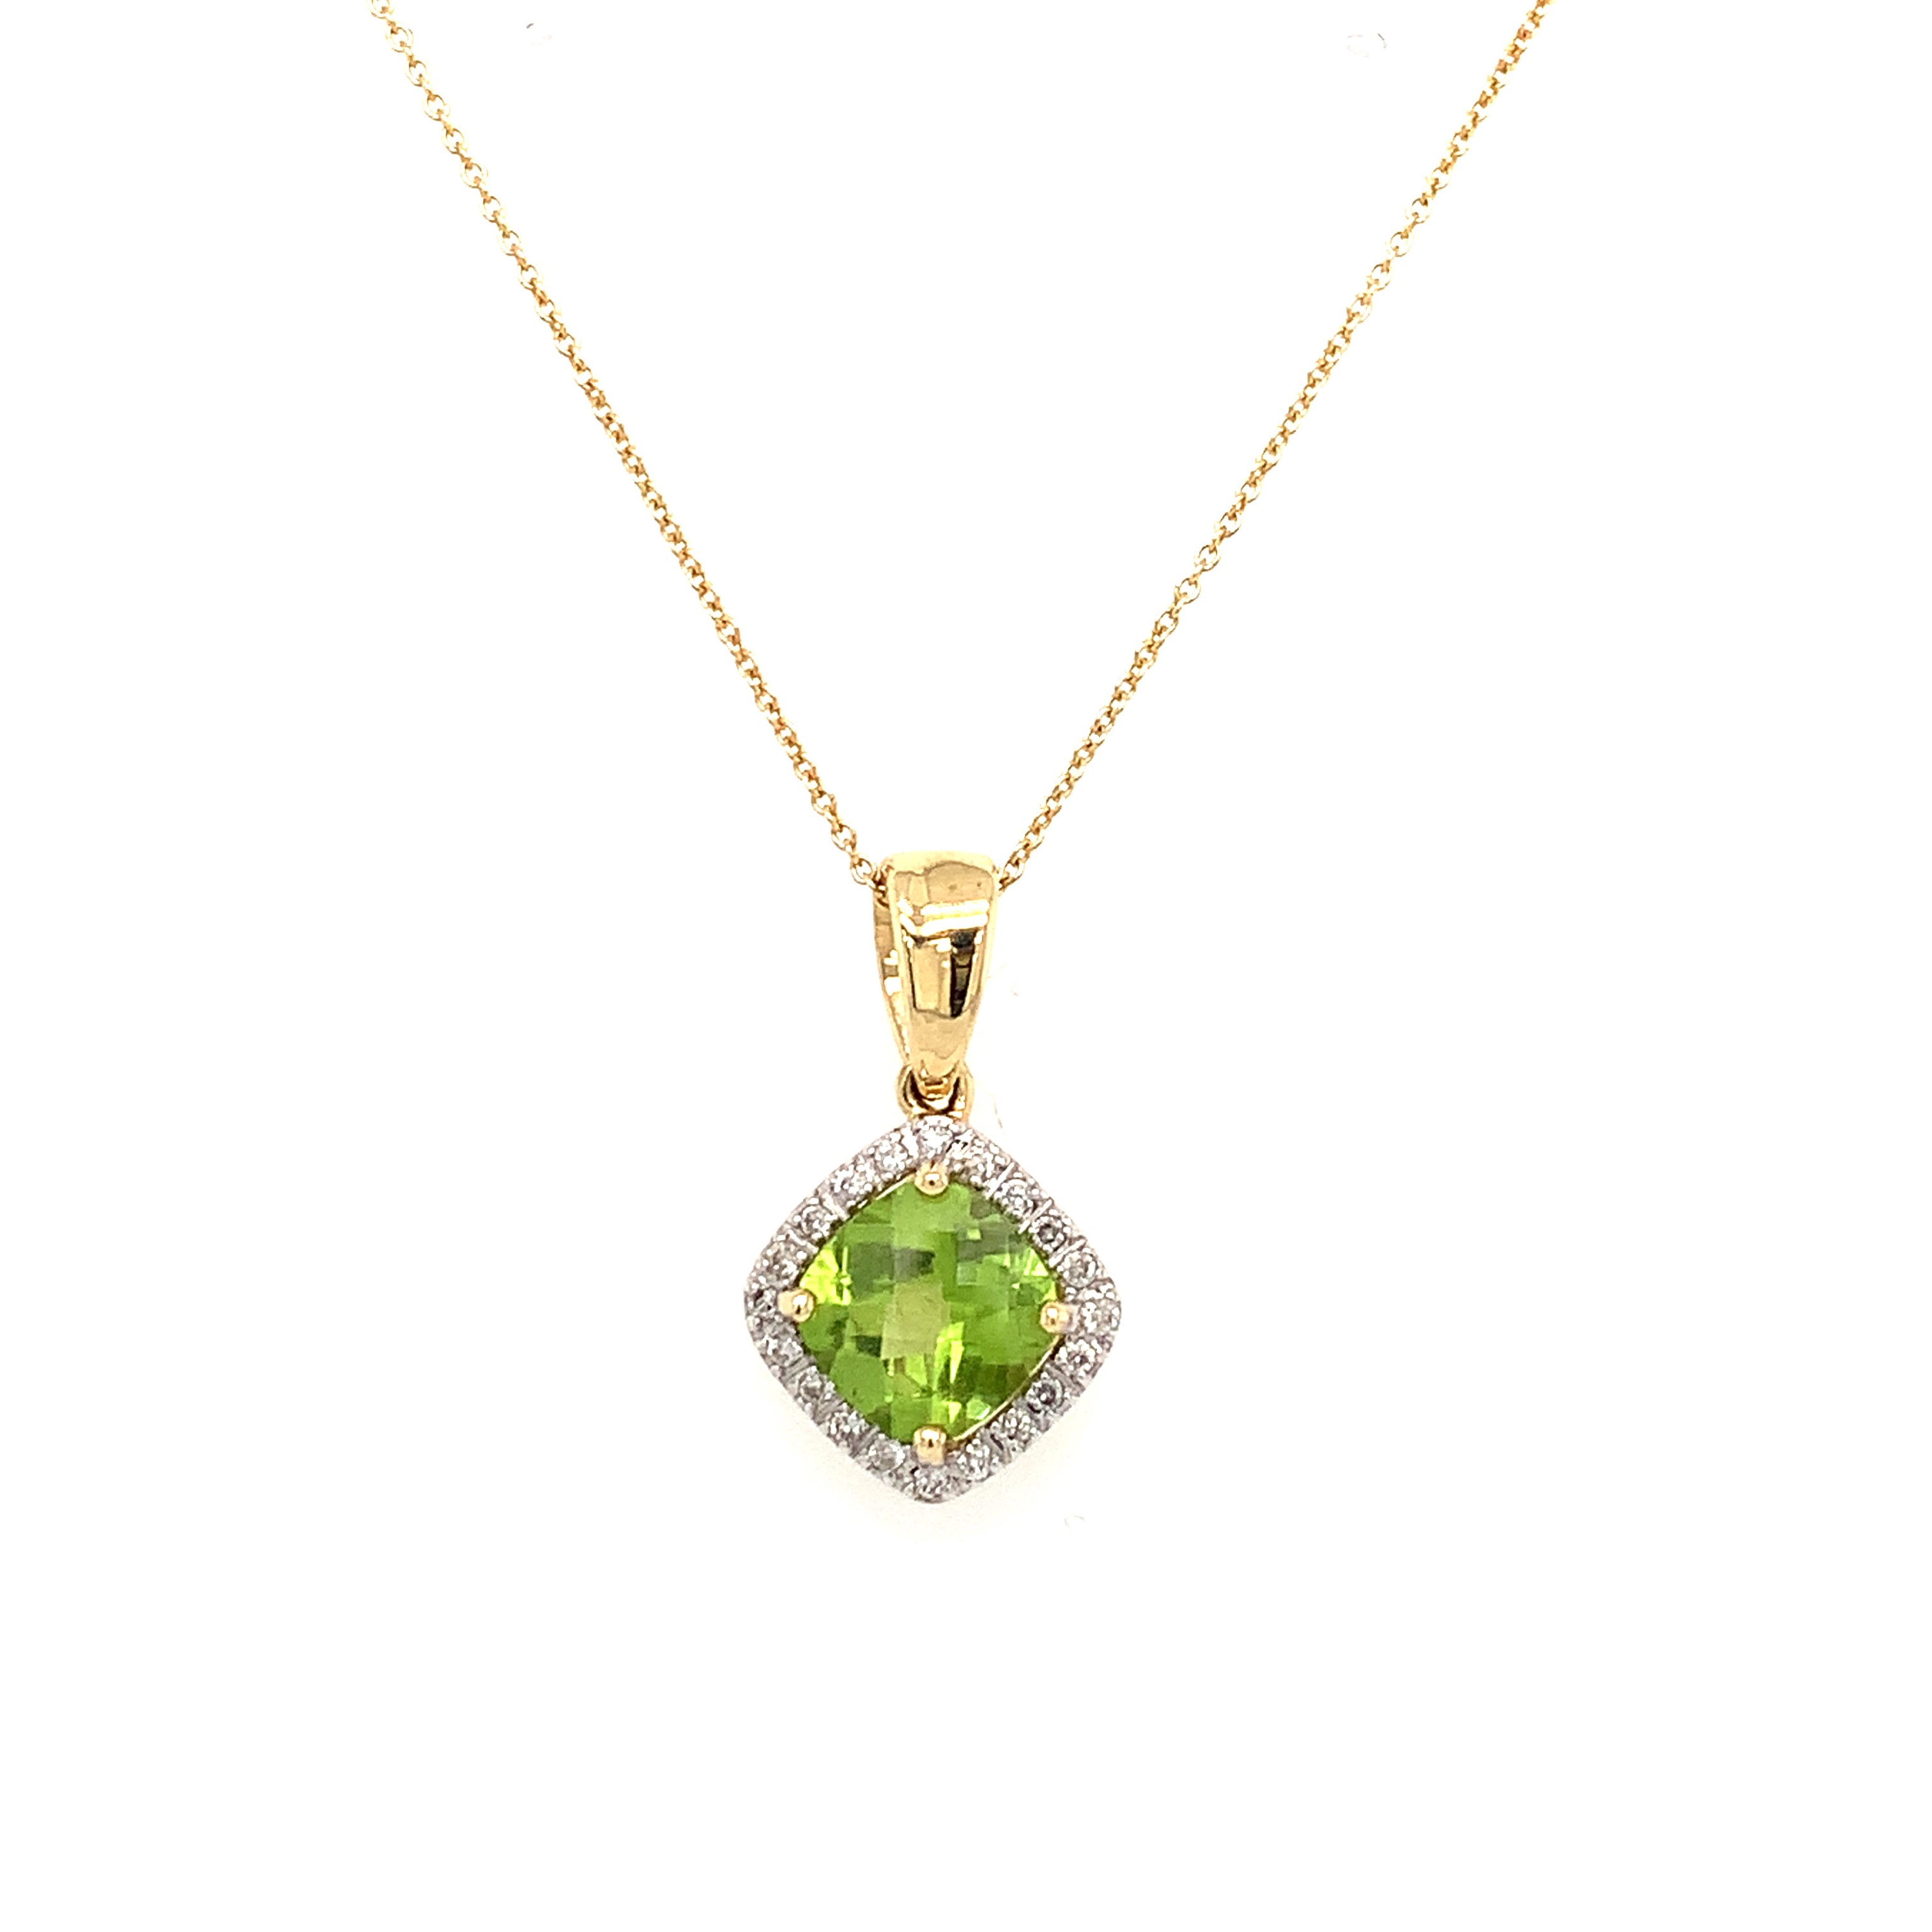 Peridot Necklace Gold Disc Necklace Charm Necklace August Birthstone Gold  Coin Necklace wedding Gift layering Necklace birthday gift